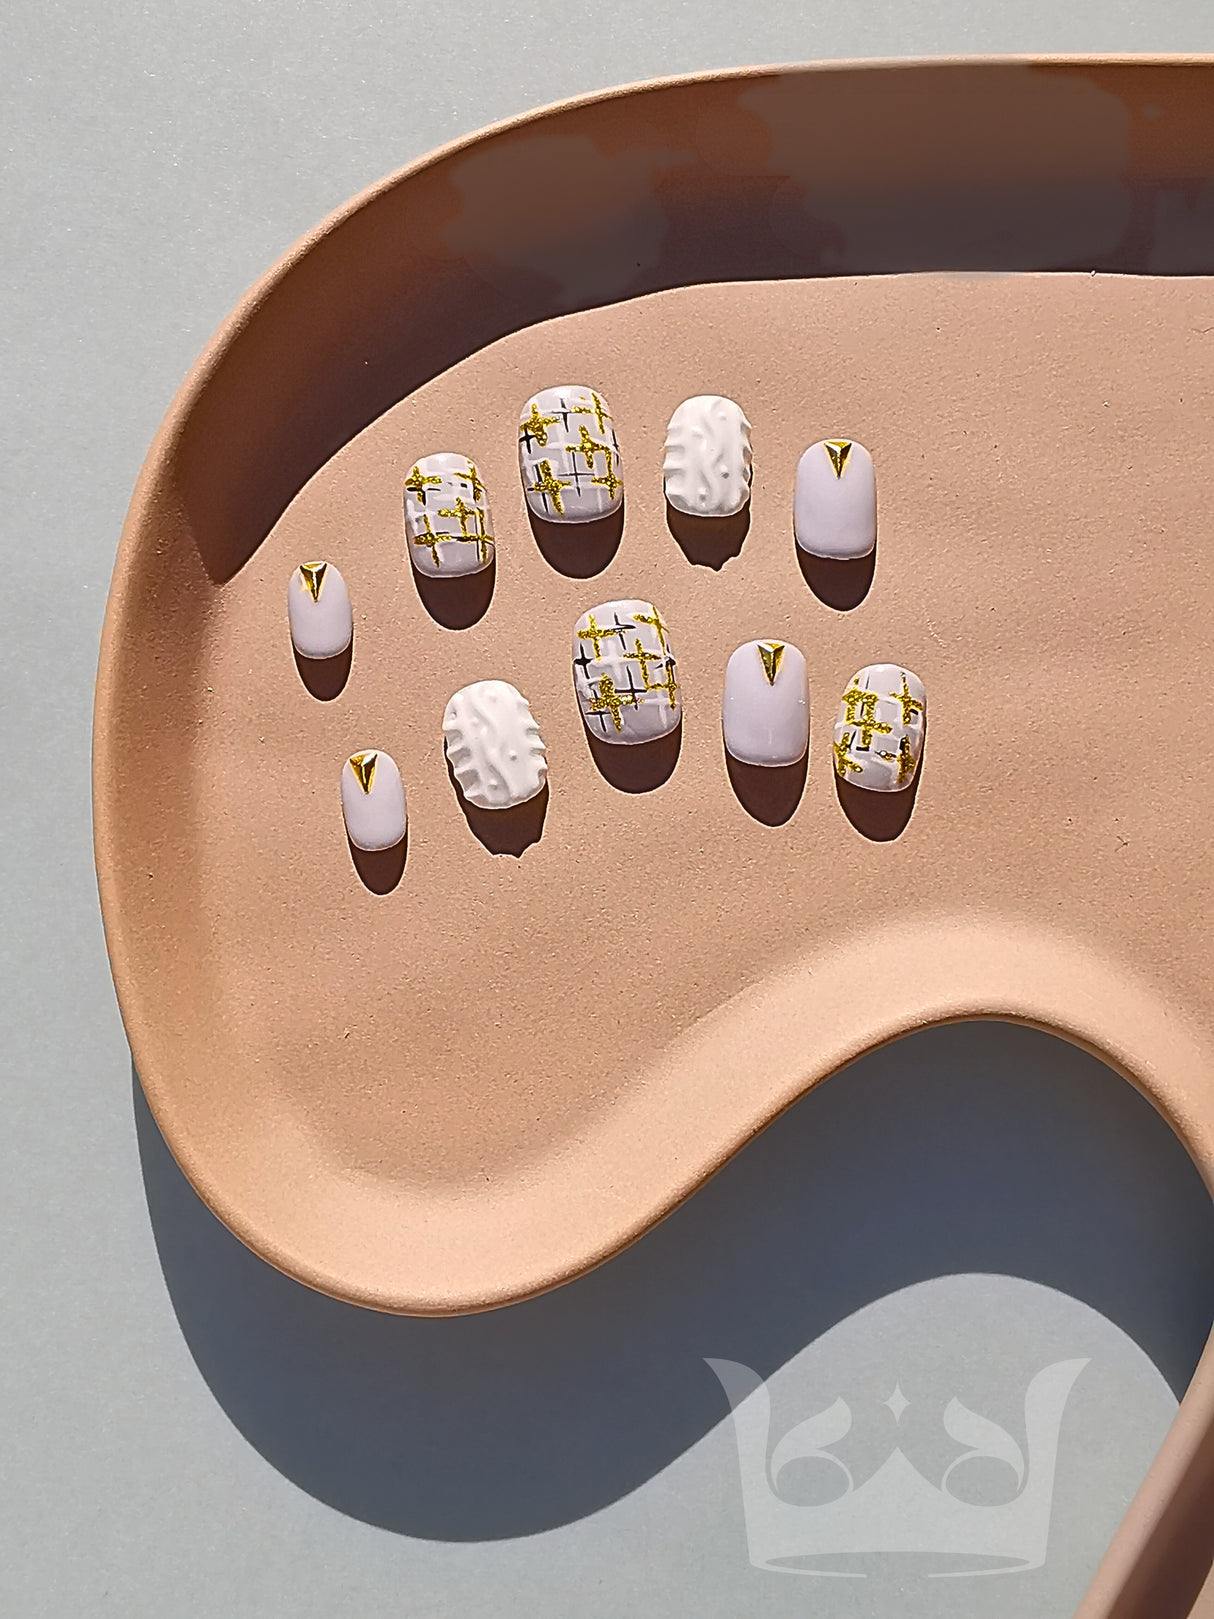 These press-on nails feature a modern twist on the classic French manicure with embellishments and geometric lines for a stylish look. Suitable for special occasions or everyday wear.